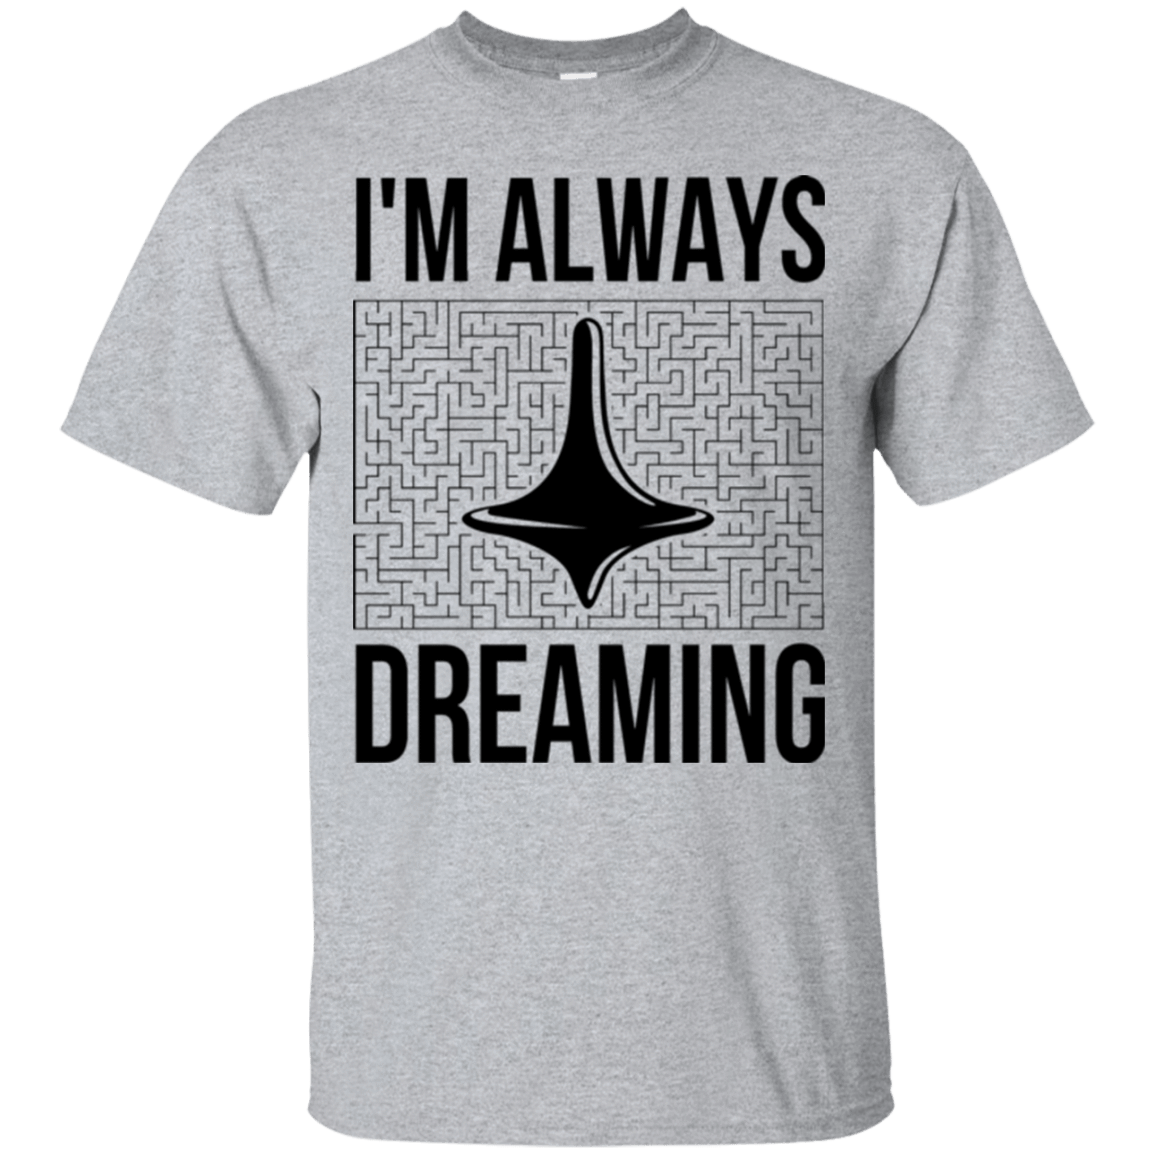 T-Shirts Sport Grey / Small Always dreaming T-Shirt